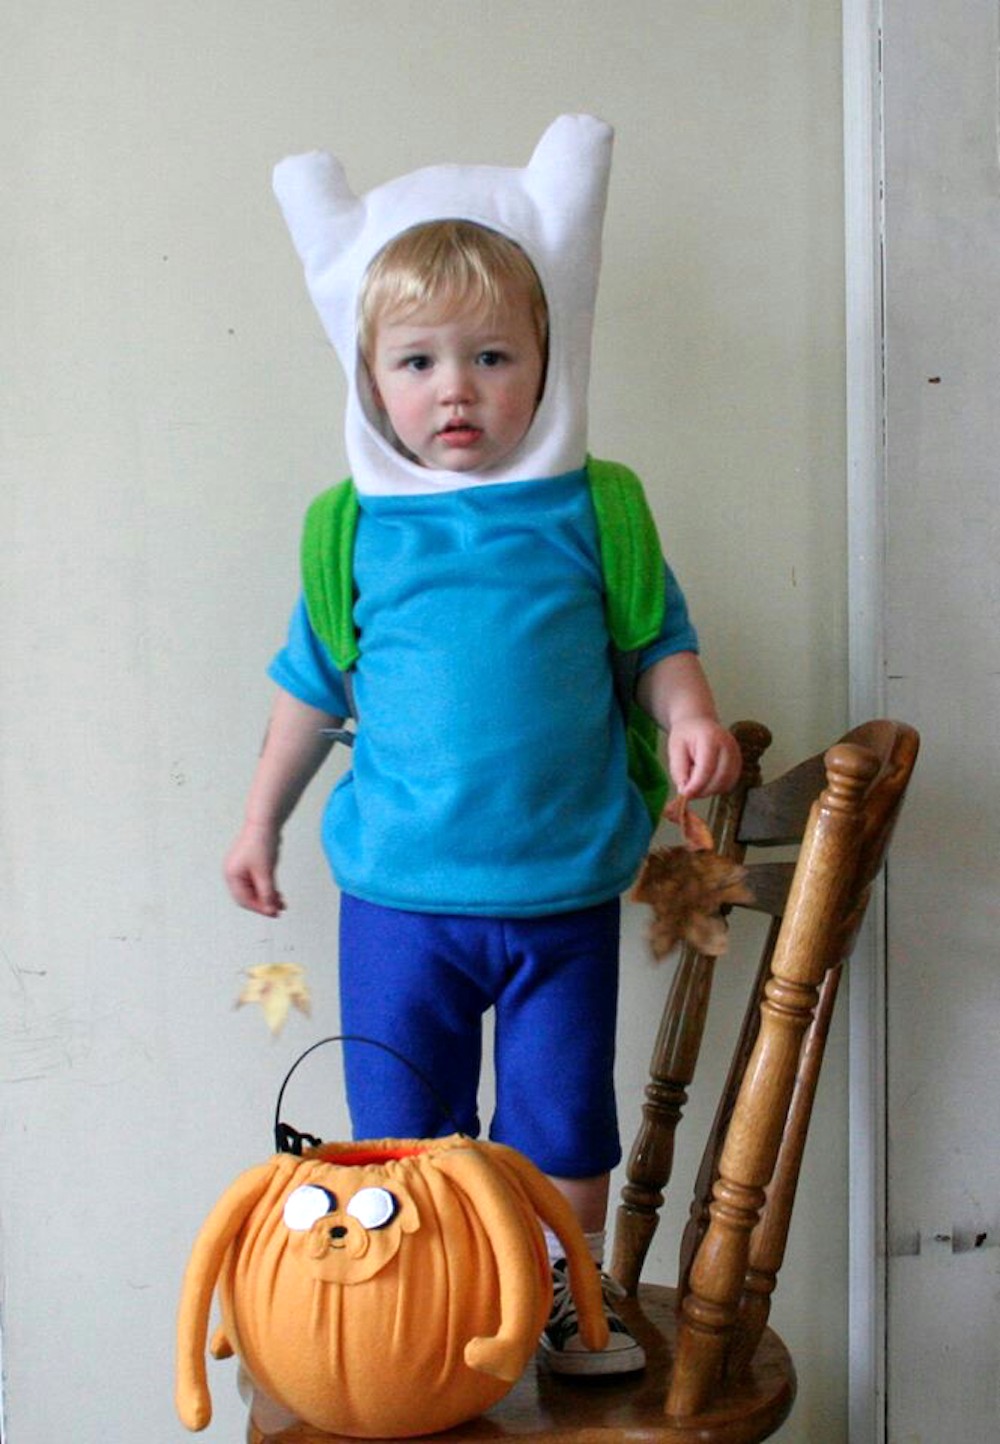 Geeky Halloween costumes for kids: Finn the Human from Adventure Time